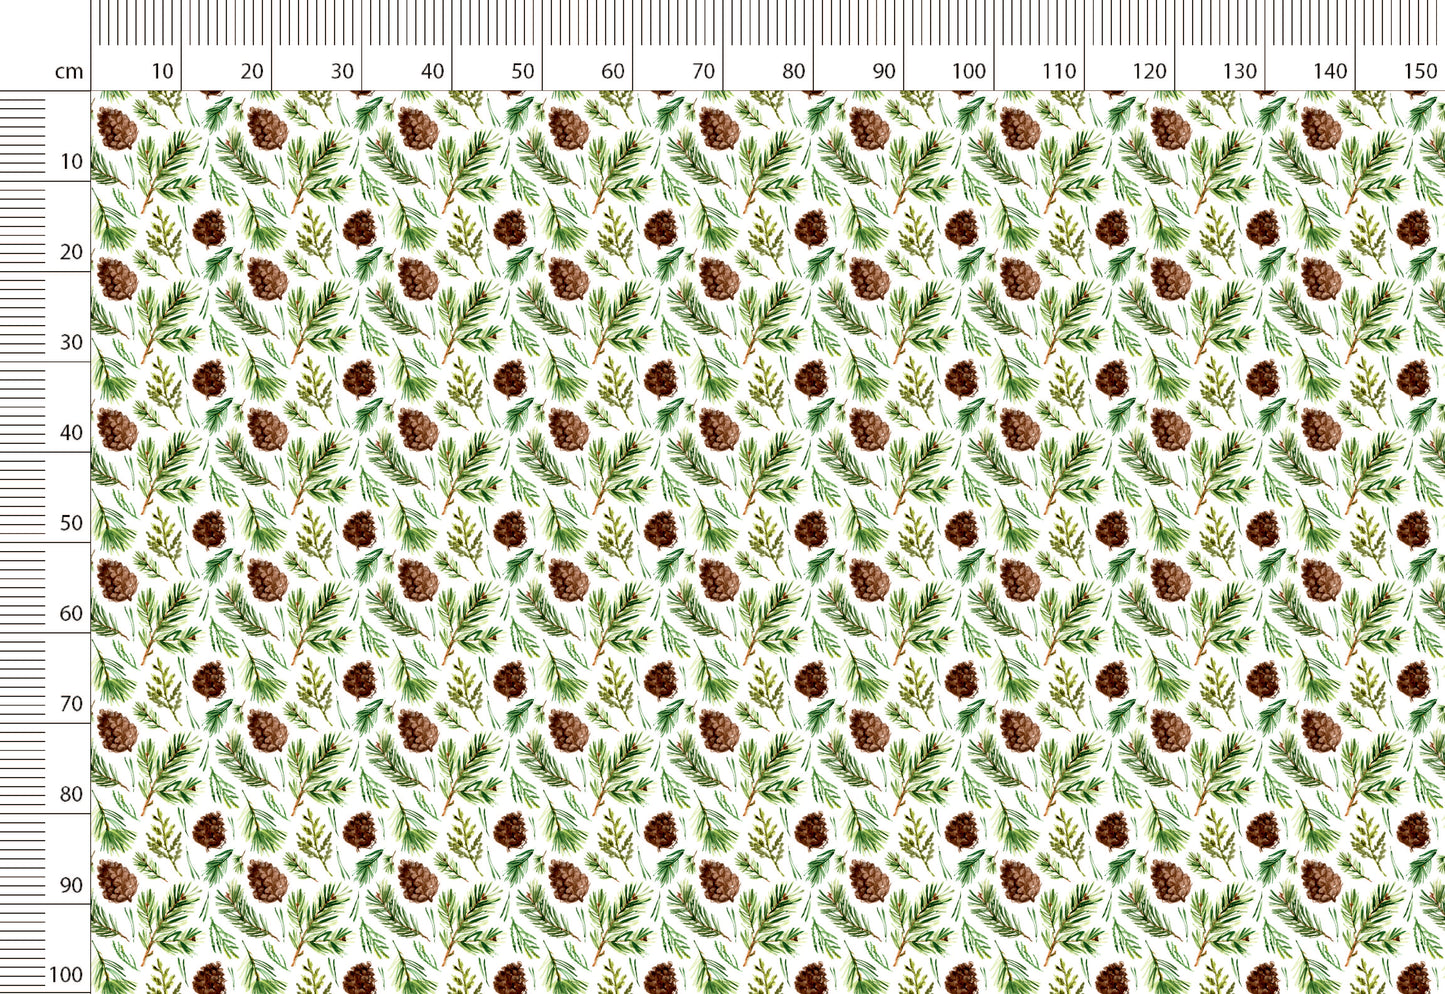 Christmas Print Linen By The Yard or Meter, Vintage Pinecones Print Linen Fabric For Bedding, Curtains, Clothing & Upholstery